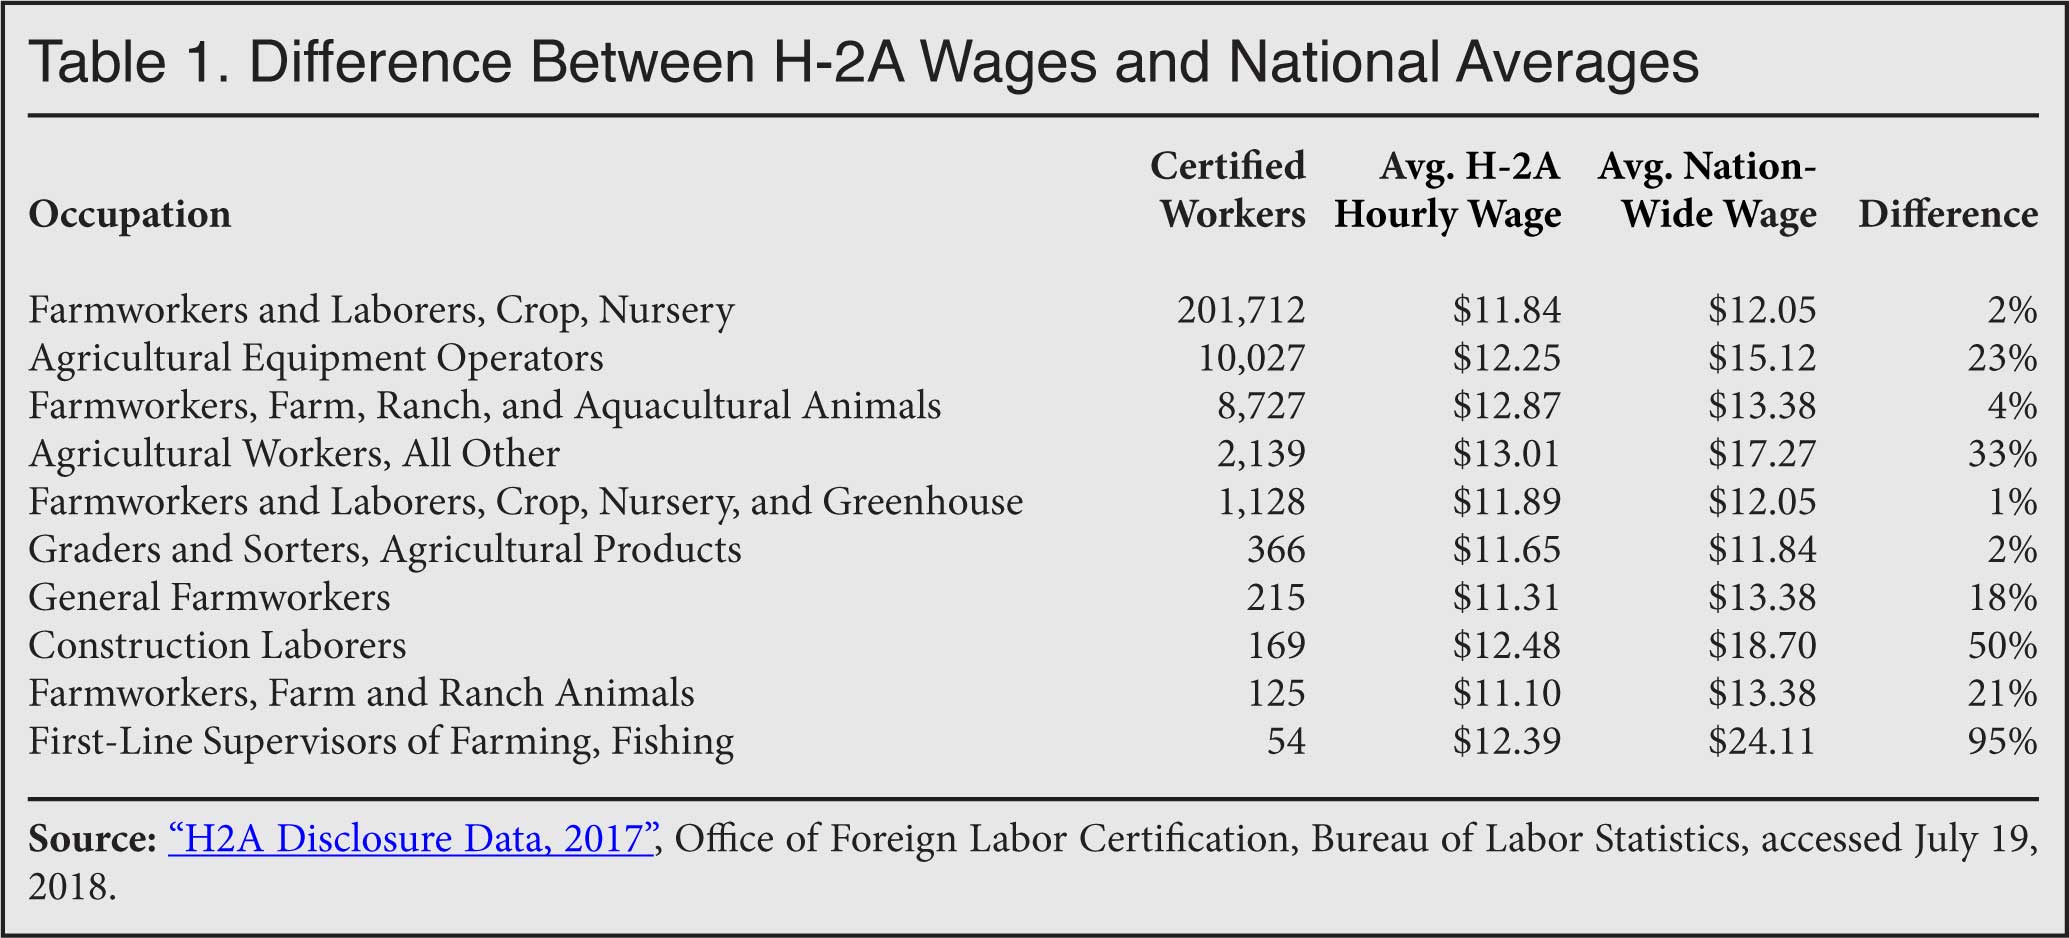 Table: Difference Between H-2A Wages and National Averages